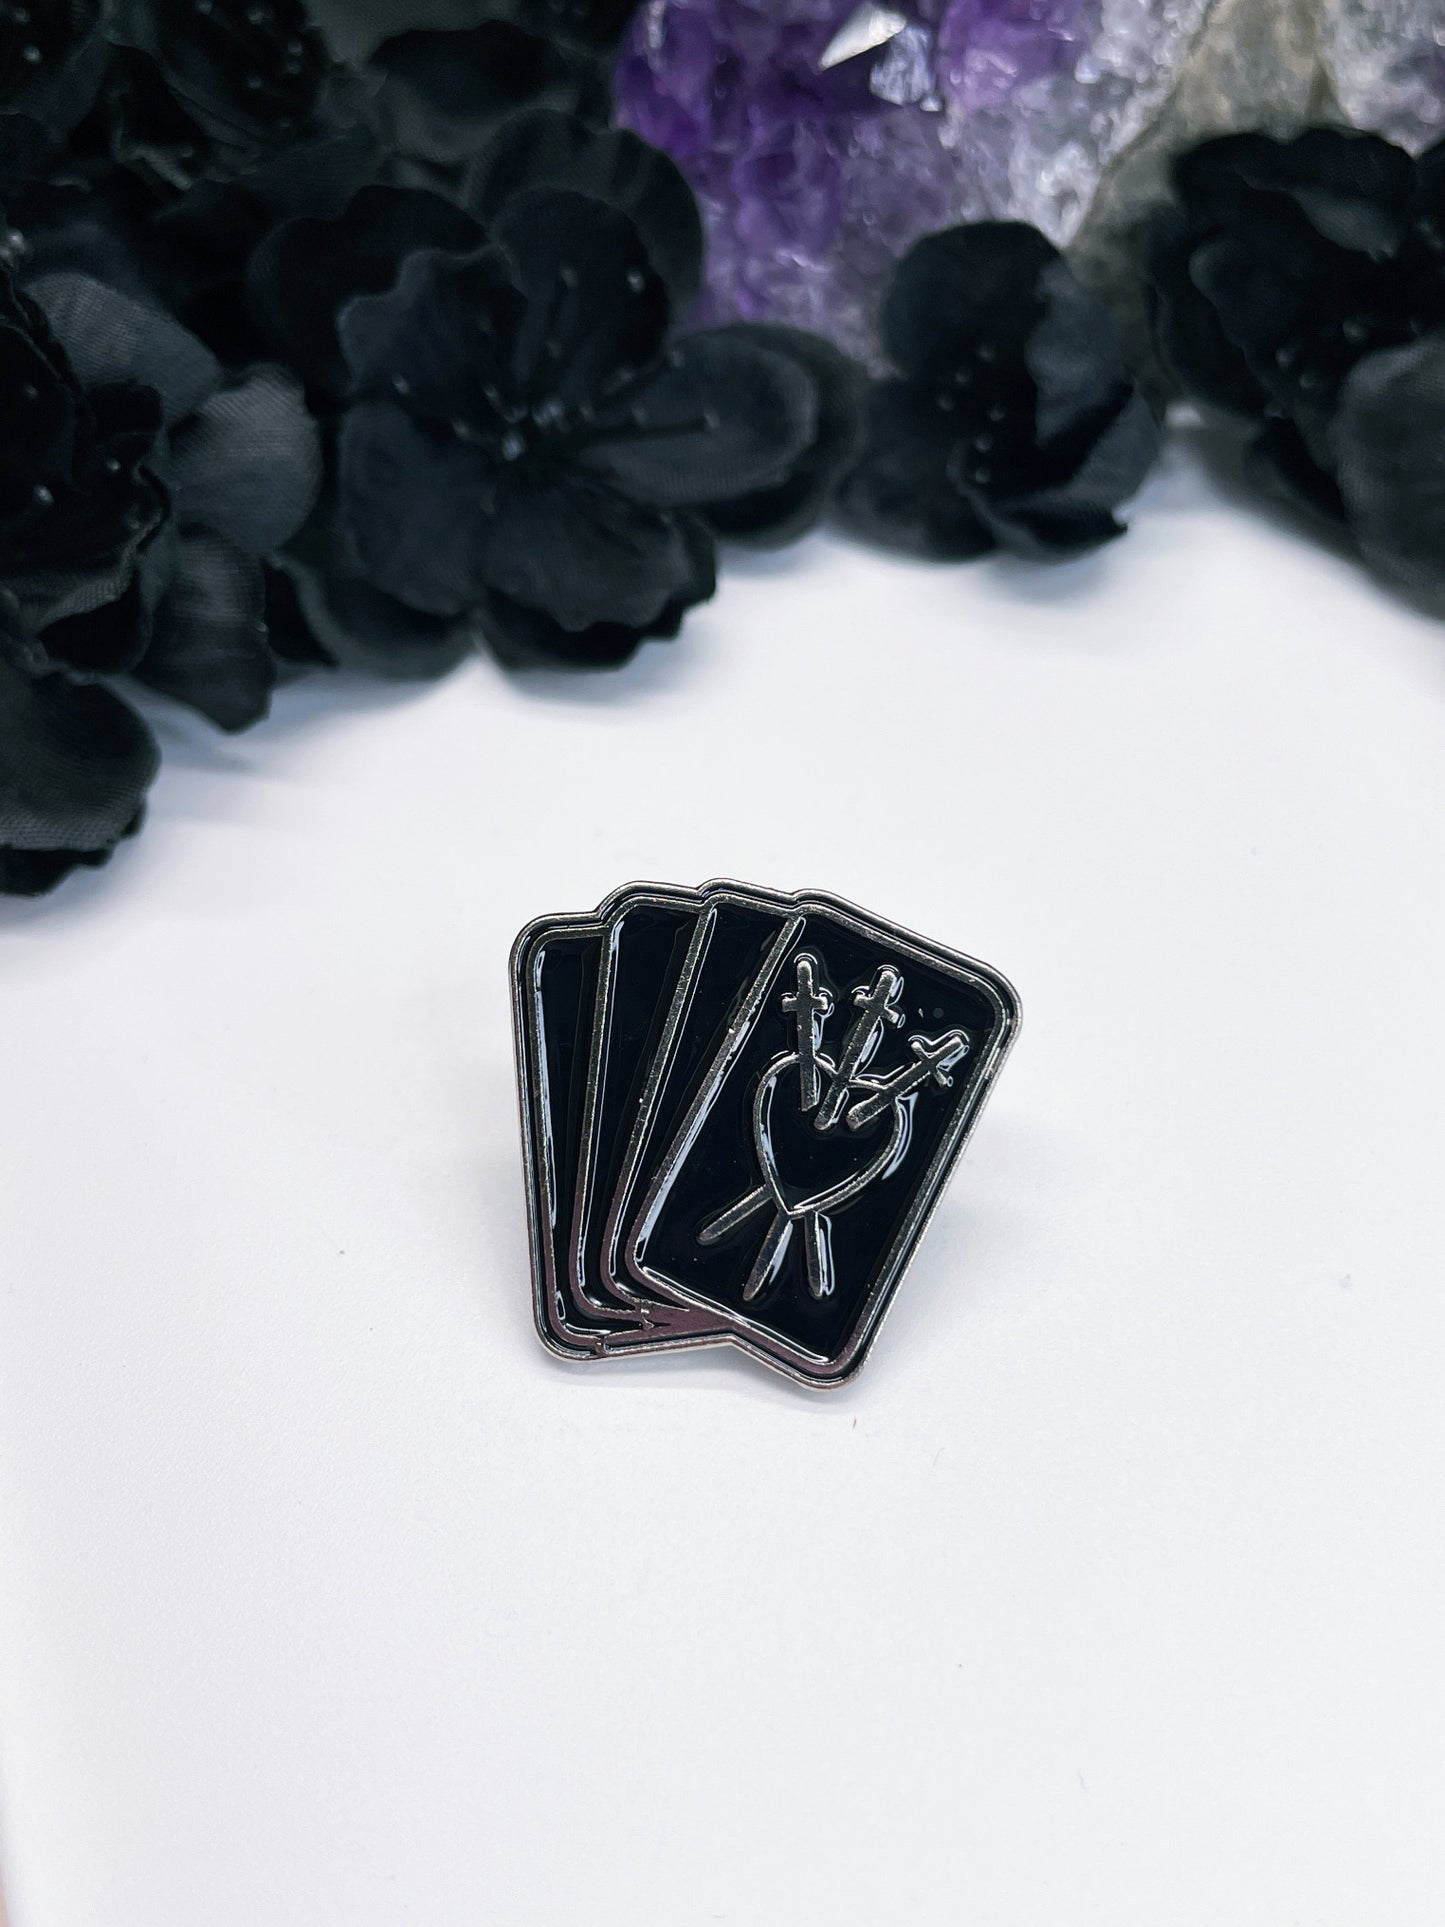 Pictured is an enamel pin of three tarot cards